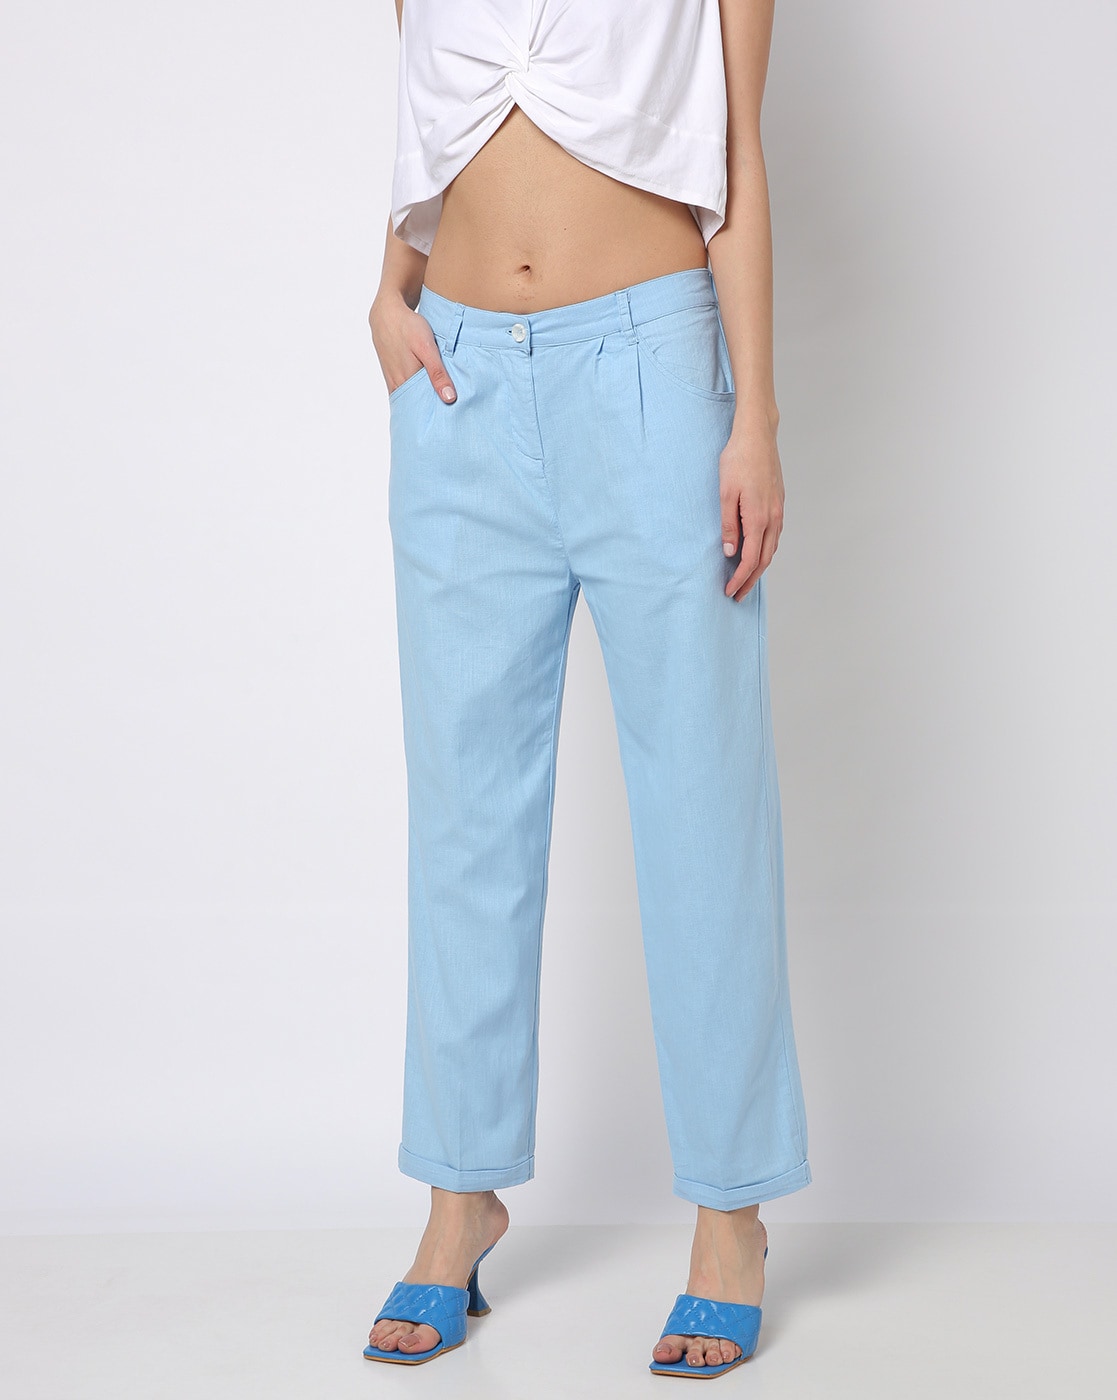 Buy Air Tuna Blue Trouser for Men  Beyours